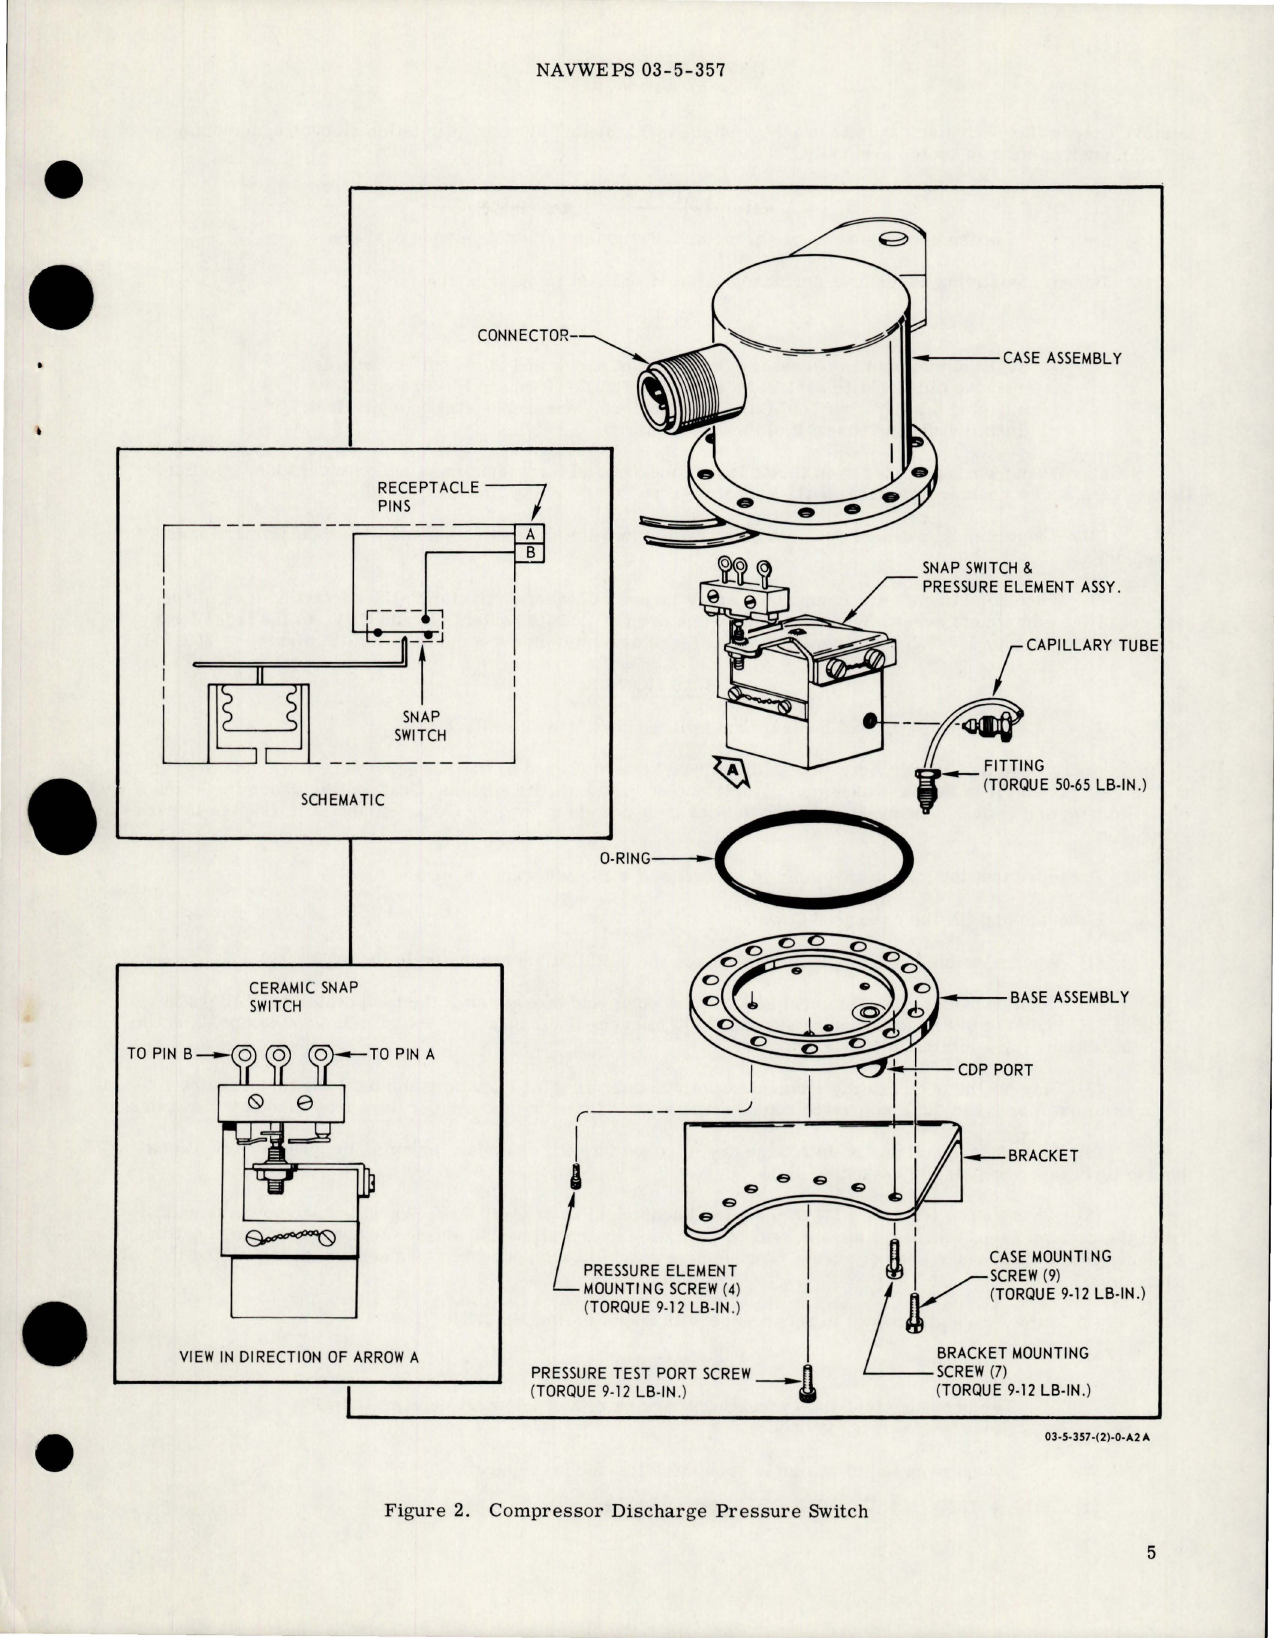 Sample page 5 from AirCorps Library document: Overhaul with Parts Breakdown for Compressor Discharge Pressure Switch - Westport Model CG 124451 - GE Part 311D894P02 